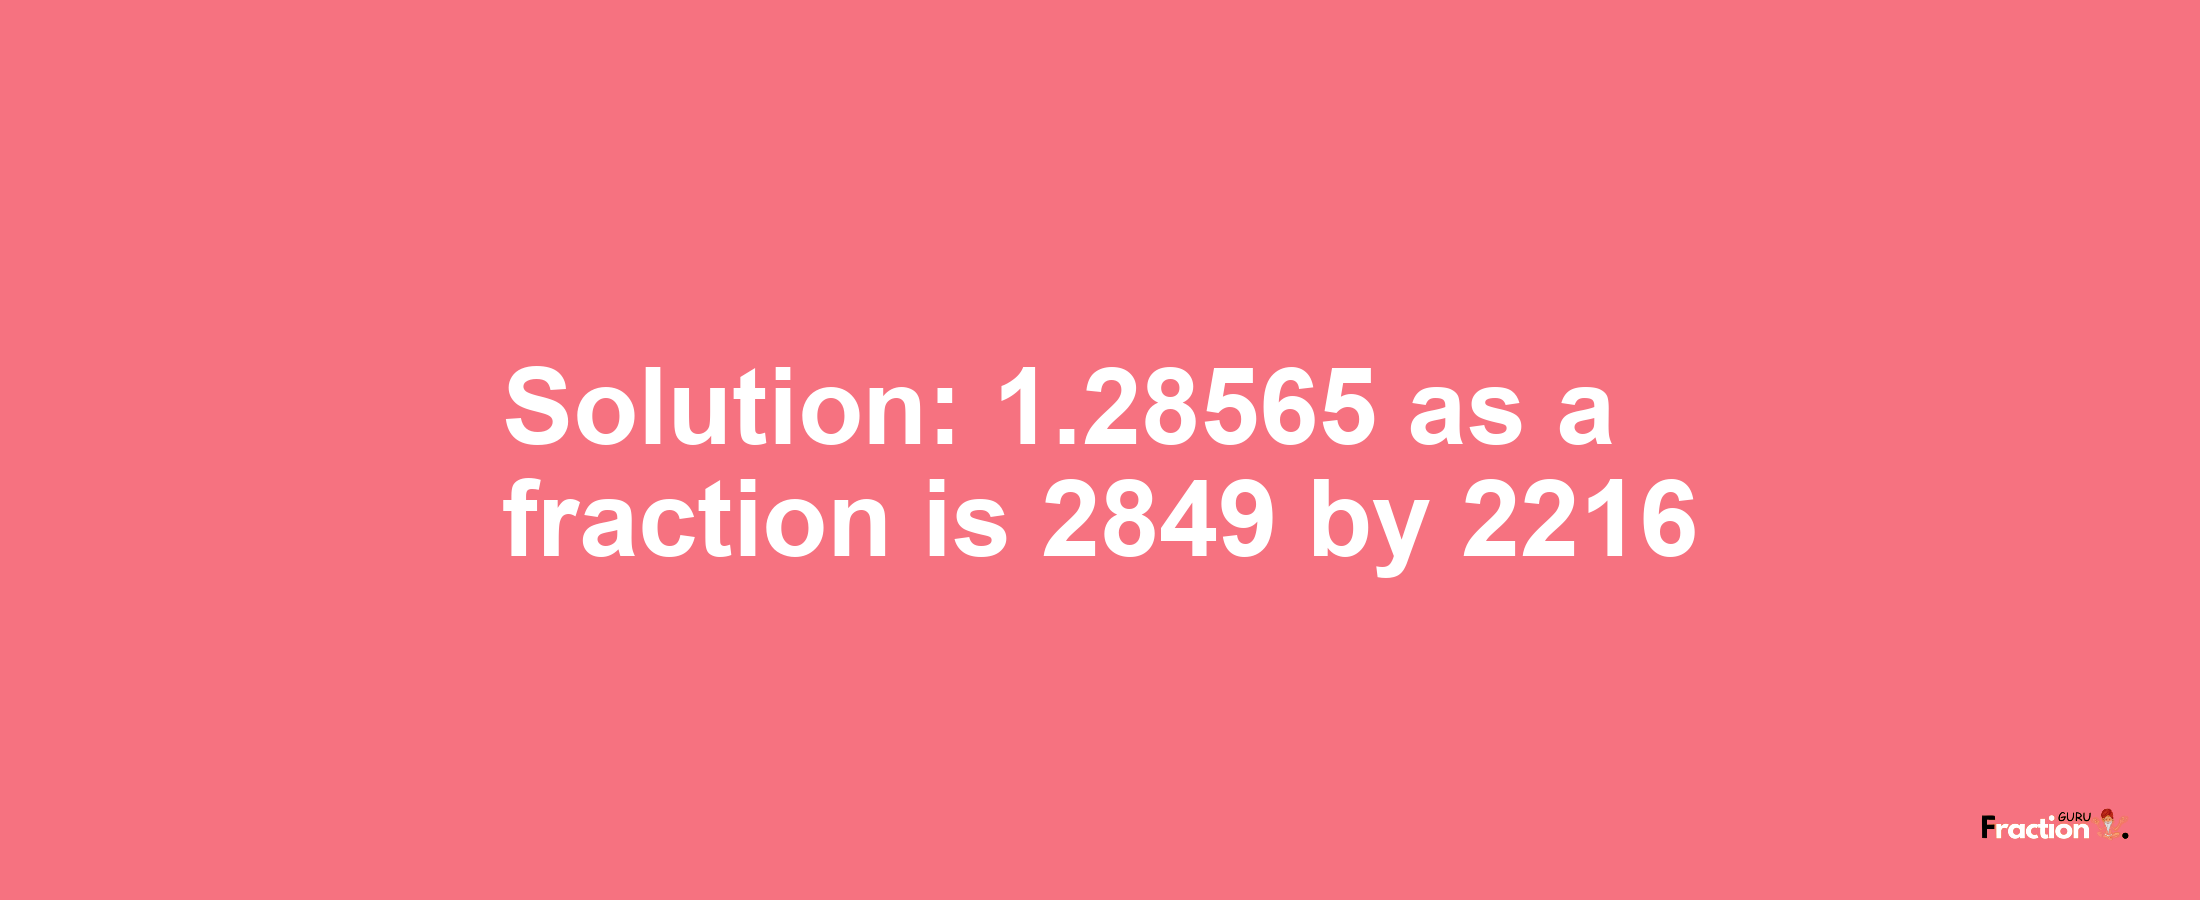 Solution:1.28565 as a fraction is 2849/2216